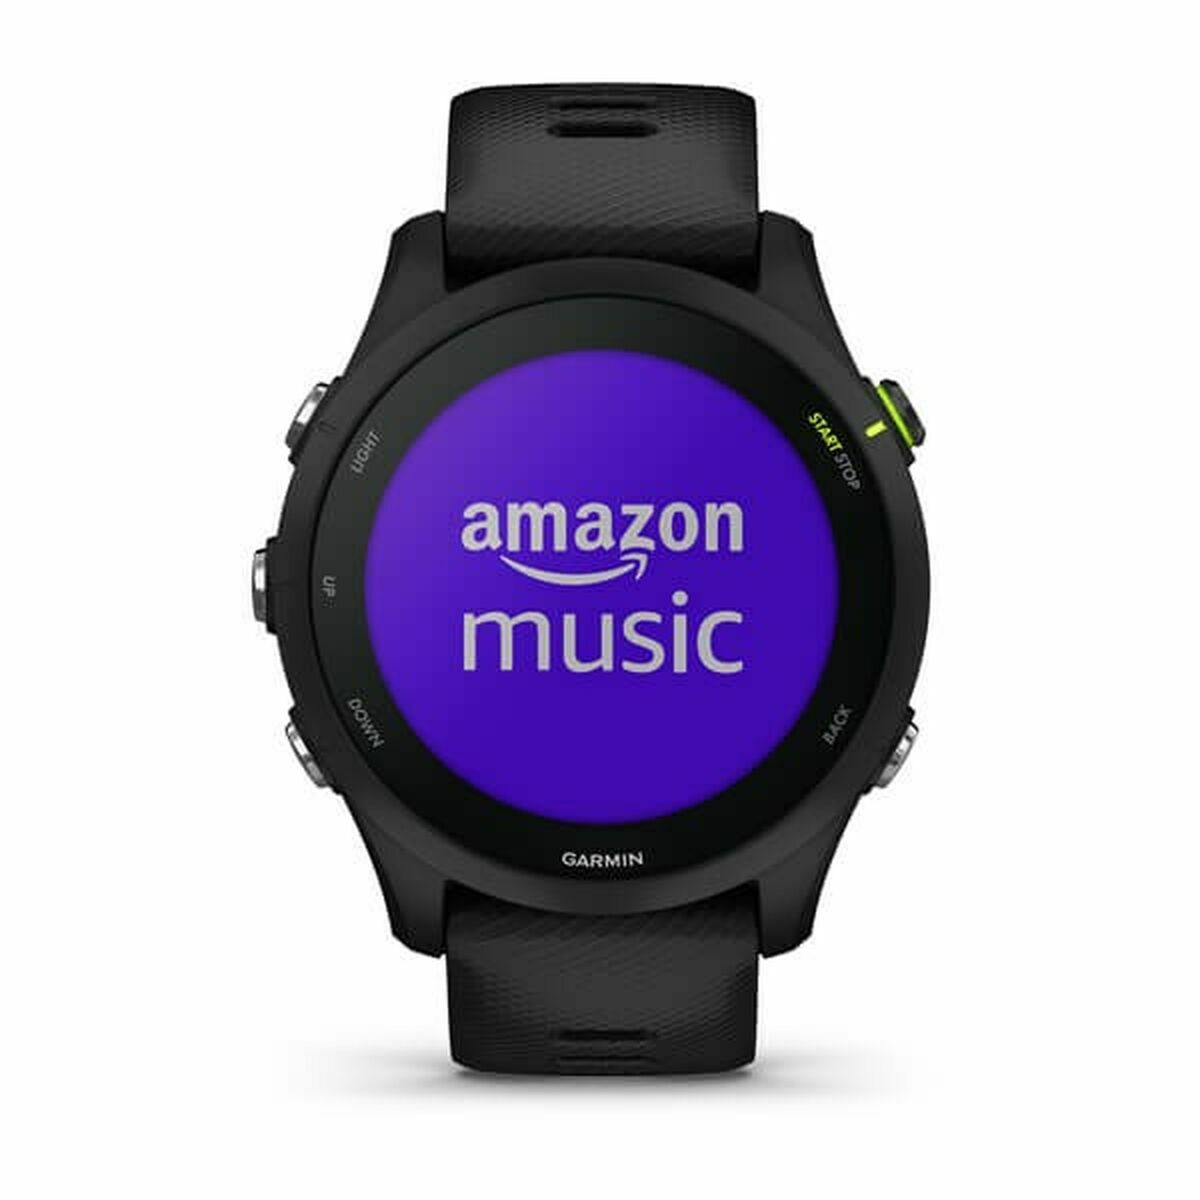 Smartwatch GARMIN Forerunner 255 Black 1,3" Ø 46 mm, GARMIN, Electronics, smartwatch-garmin-forerunner-255-black-1-3-o-46-mm, Brand_GARMIN, category-reference-2609, category-reference-2617, category-reference-2634, category-reference-t-19653, category-reference-t-4082, Condition_NEW, original gifts, Price_300 - 400, telephones & tablets, Teleworking, wifi y bluetooth, RiotNook